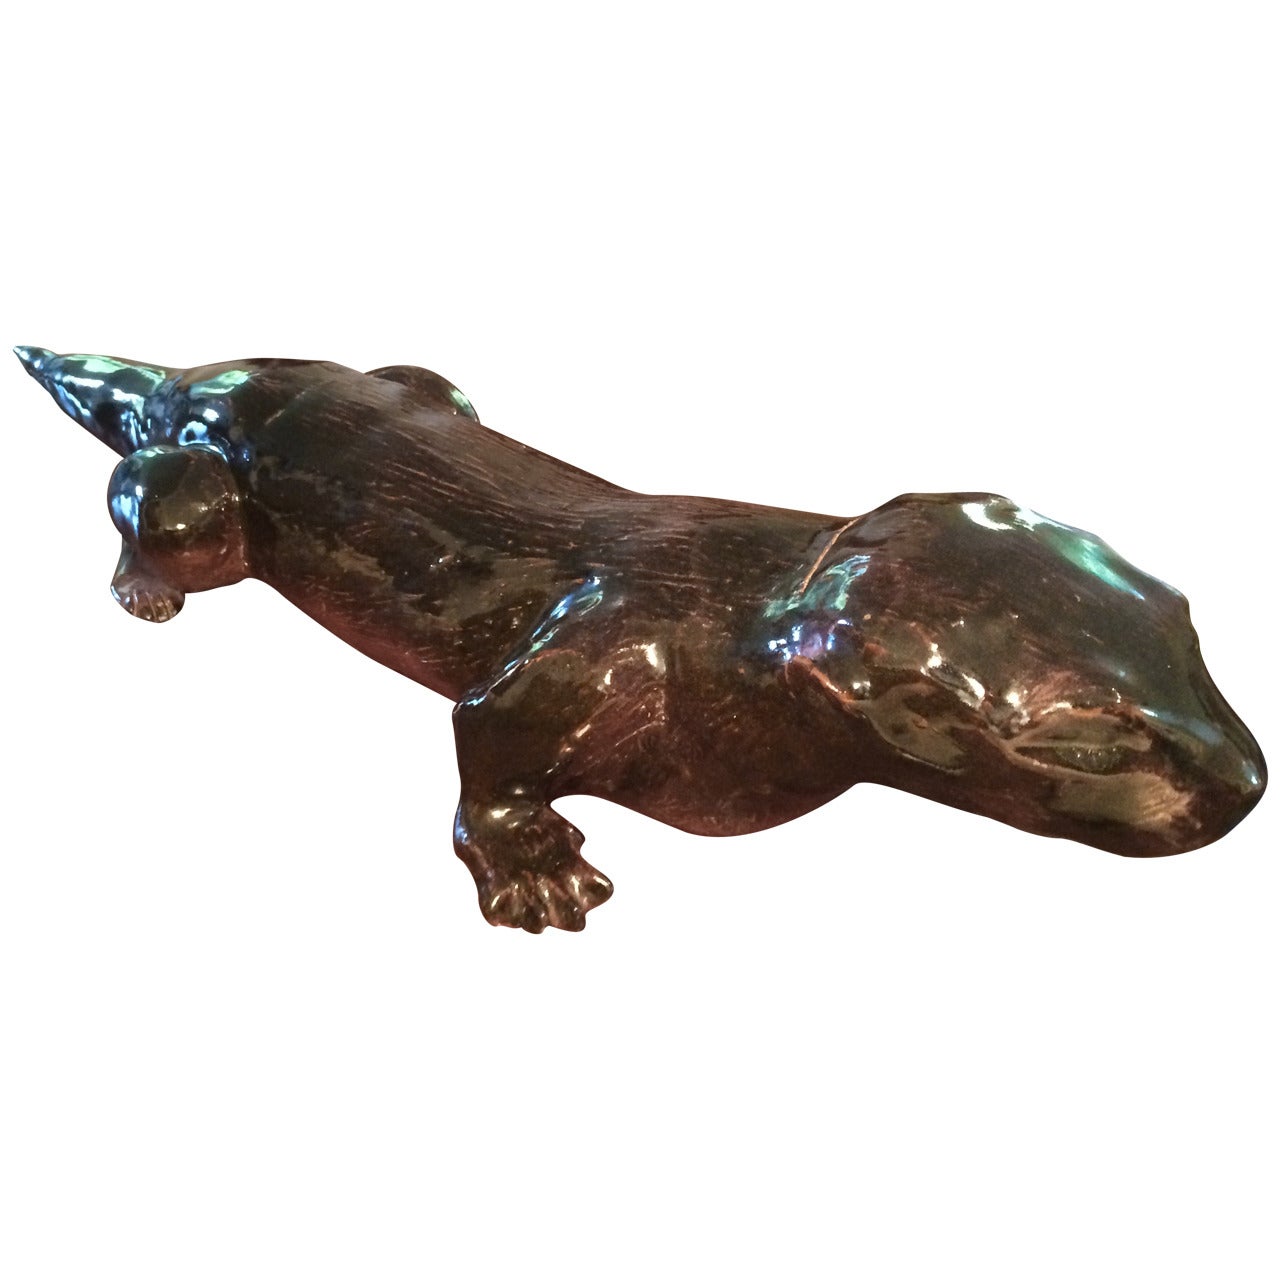 Early 20th Century "Sewer Tile" Sculpture of a Sea Otter For Sale